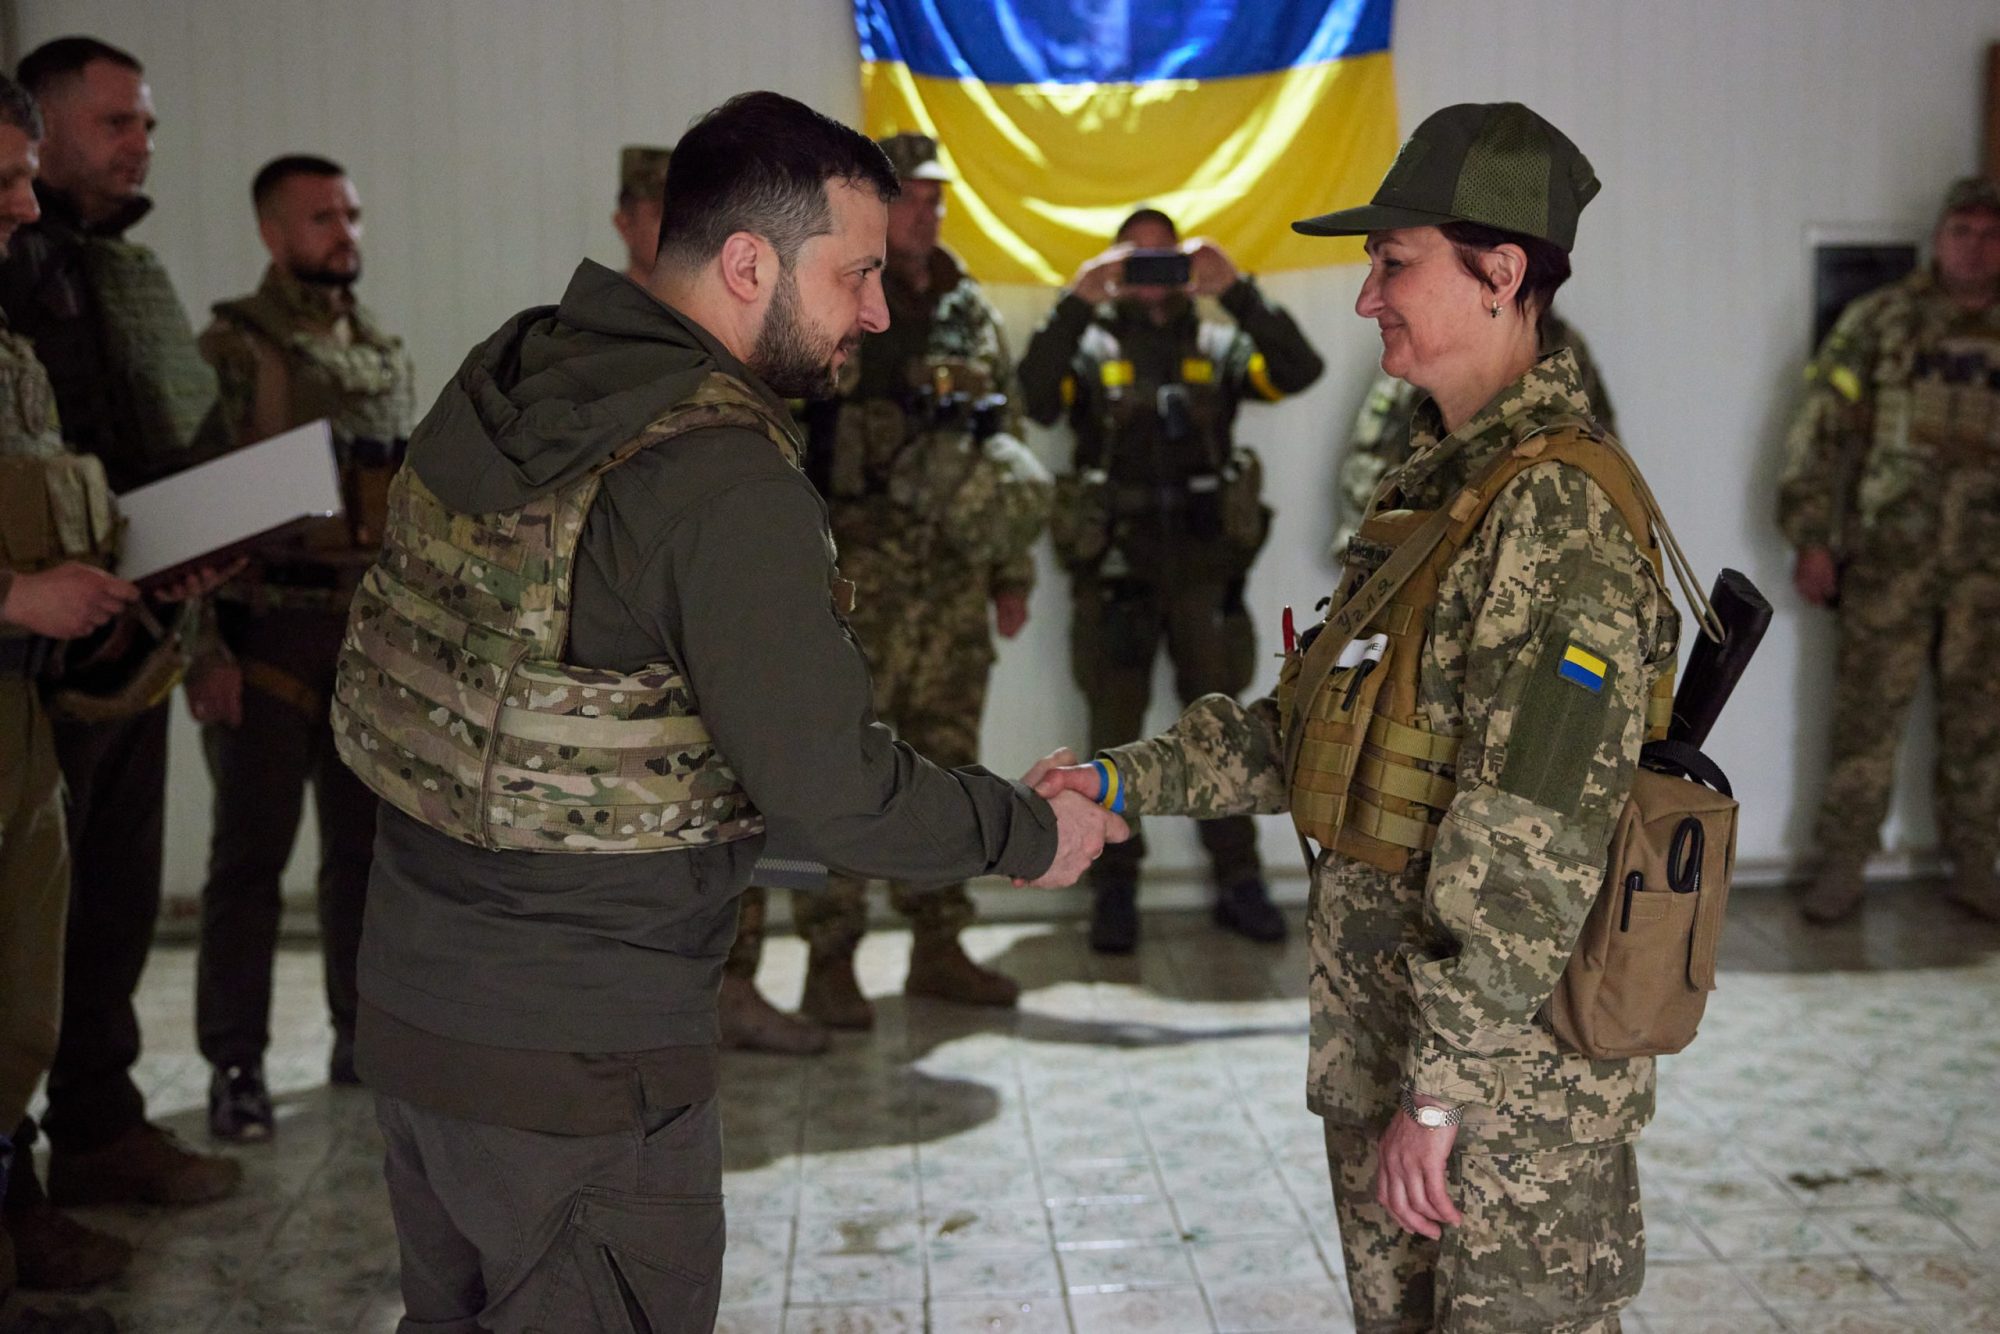 Ukraine Approves Women's Military Uniforms for the First Time